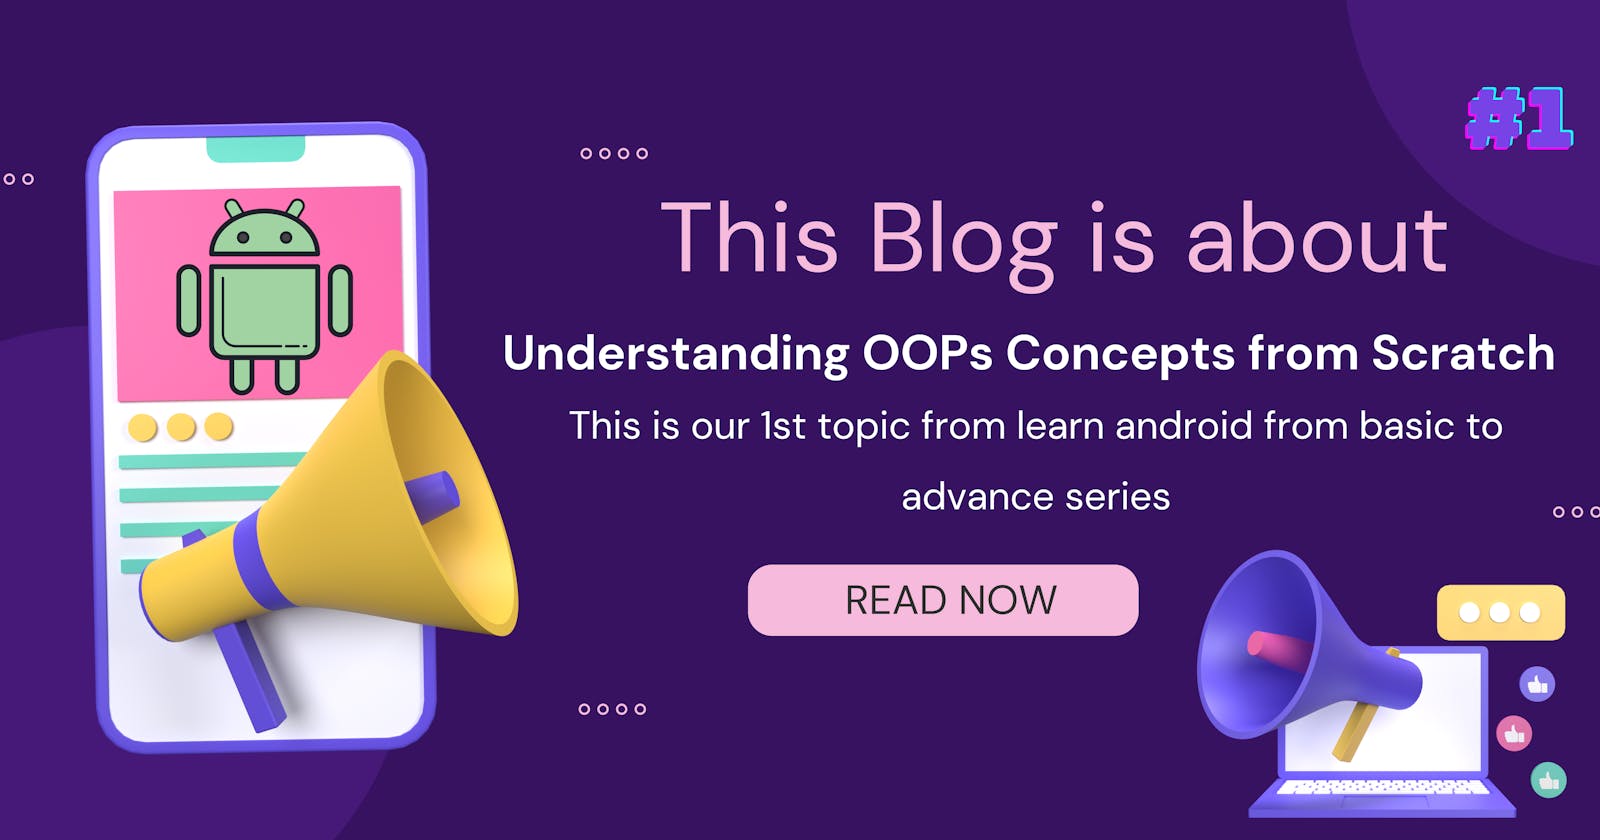 Topic 1: Understanding OOPs Concepts from Scratch